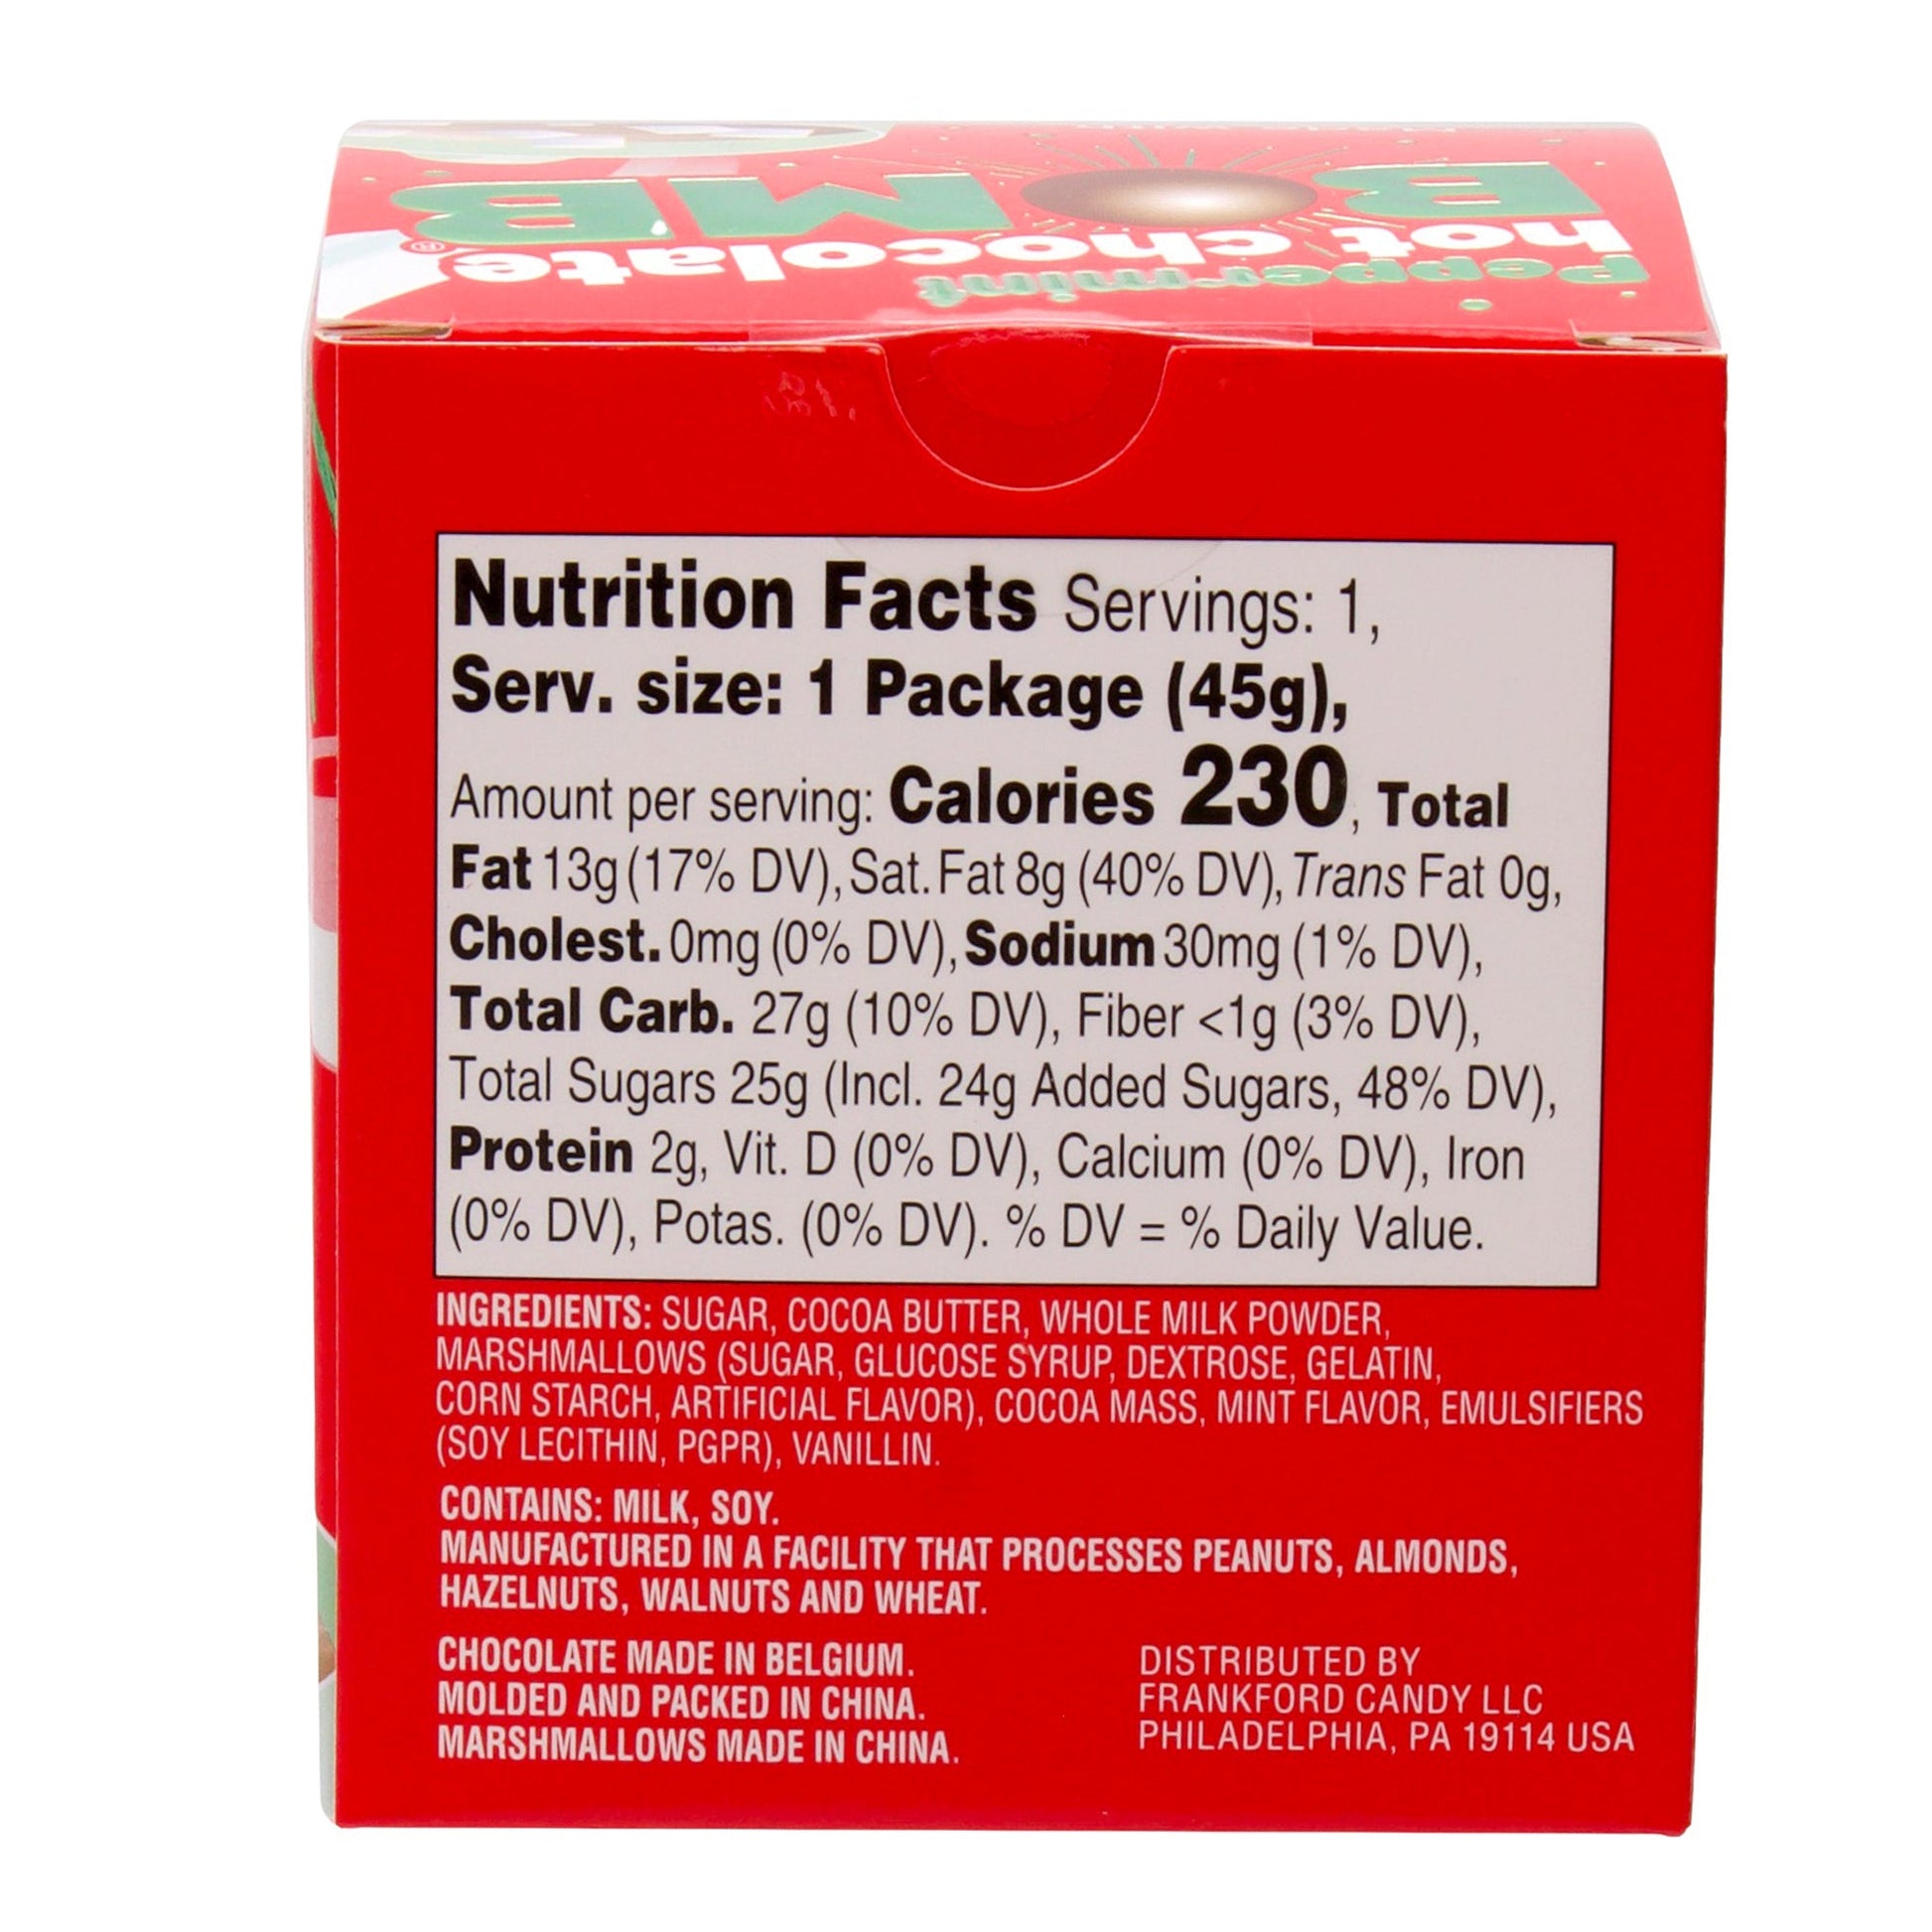 back of red box with nutrition facts and ingredients